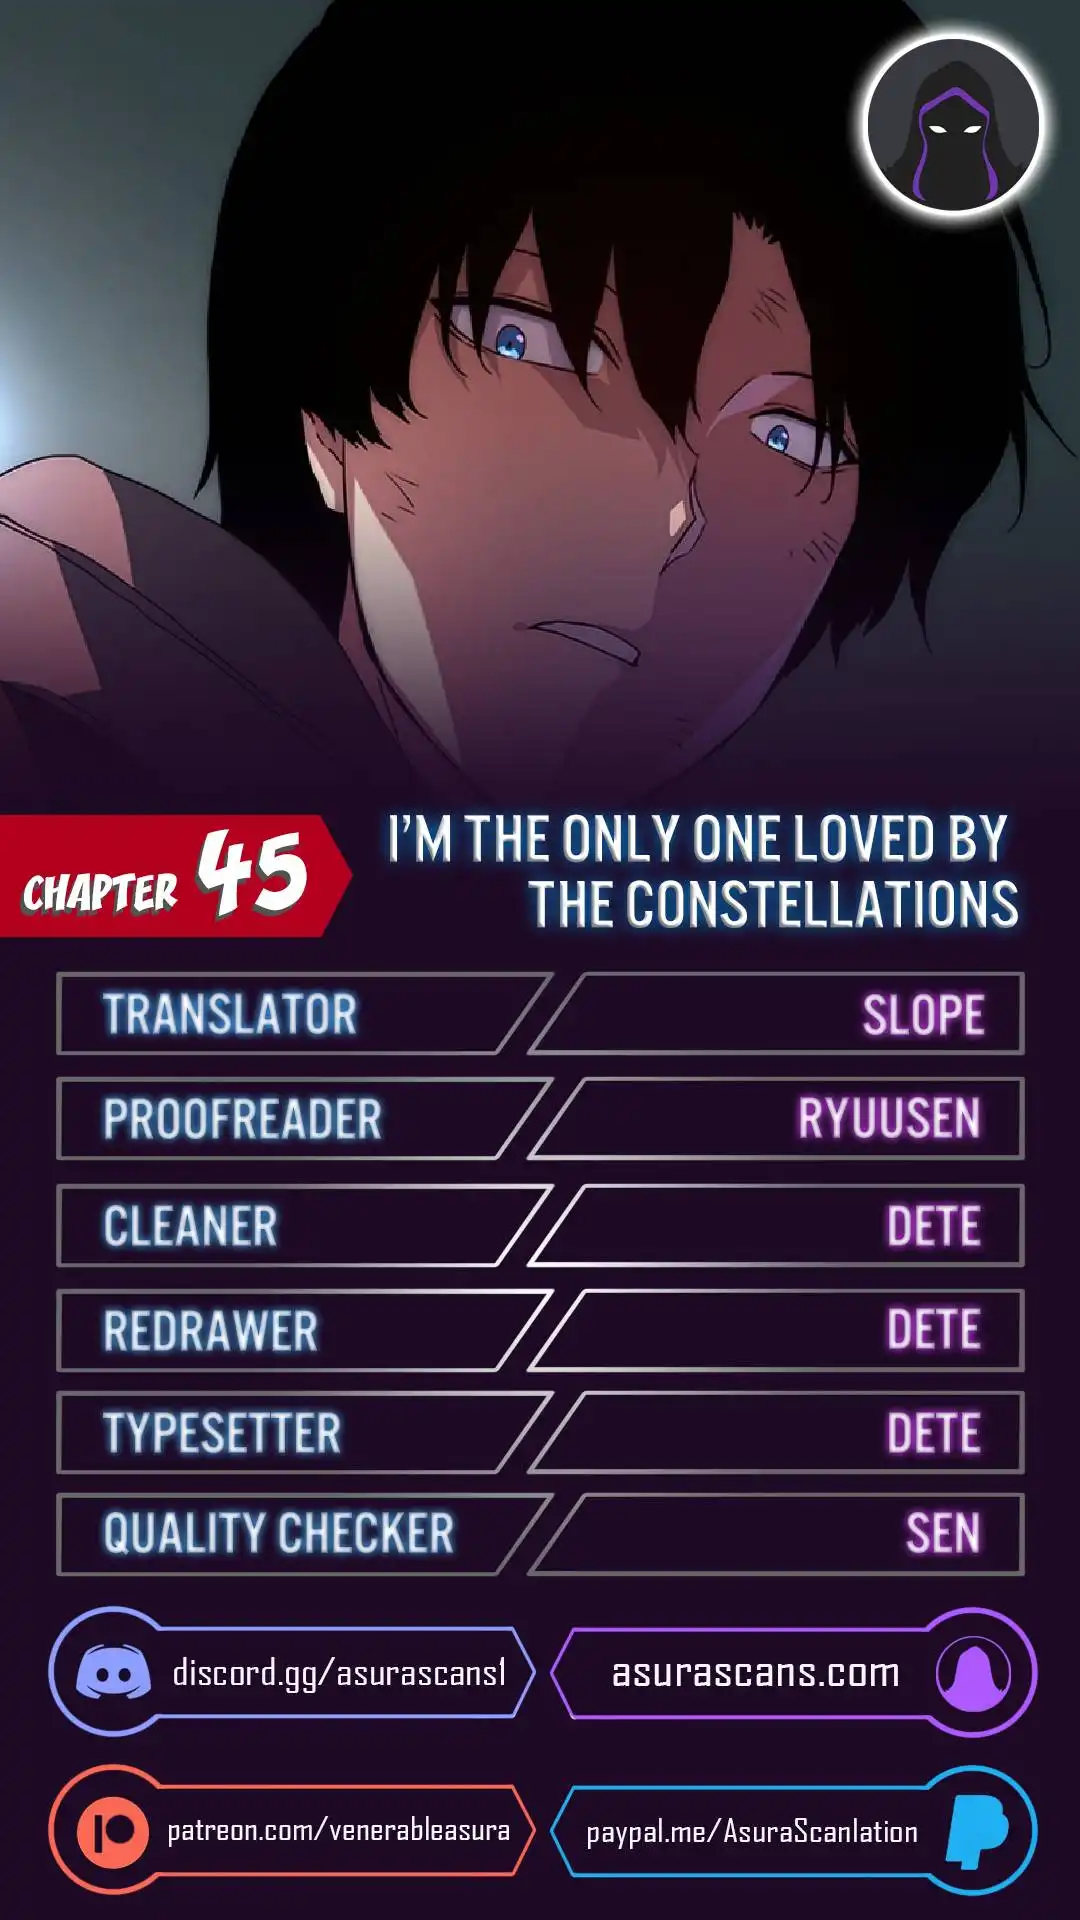 I'm the Only One Loved by the Constellations! Chapter 45